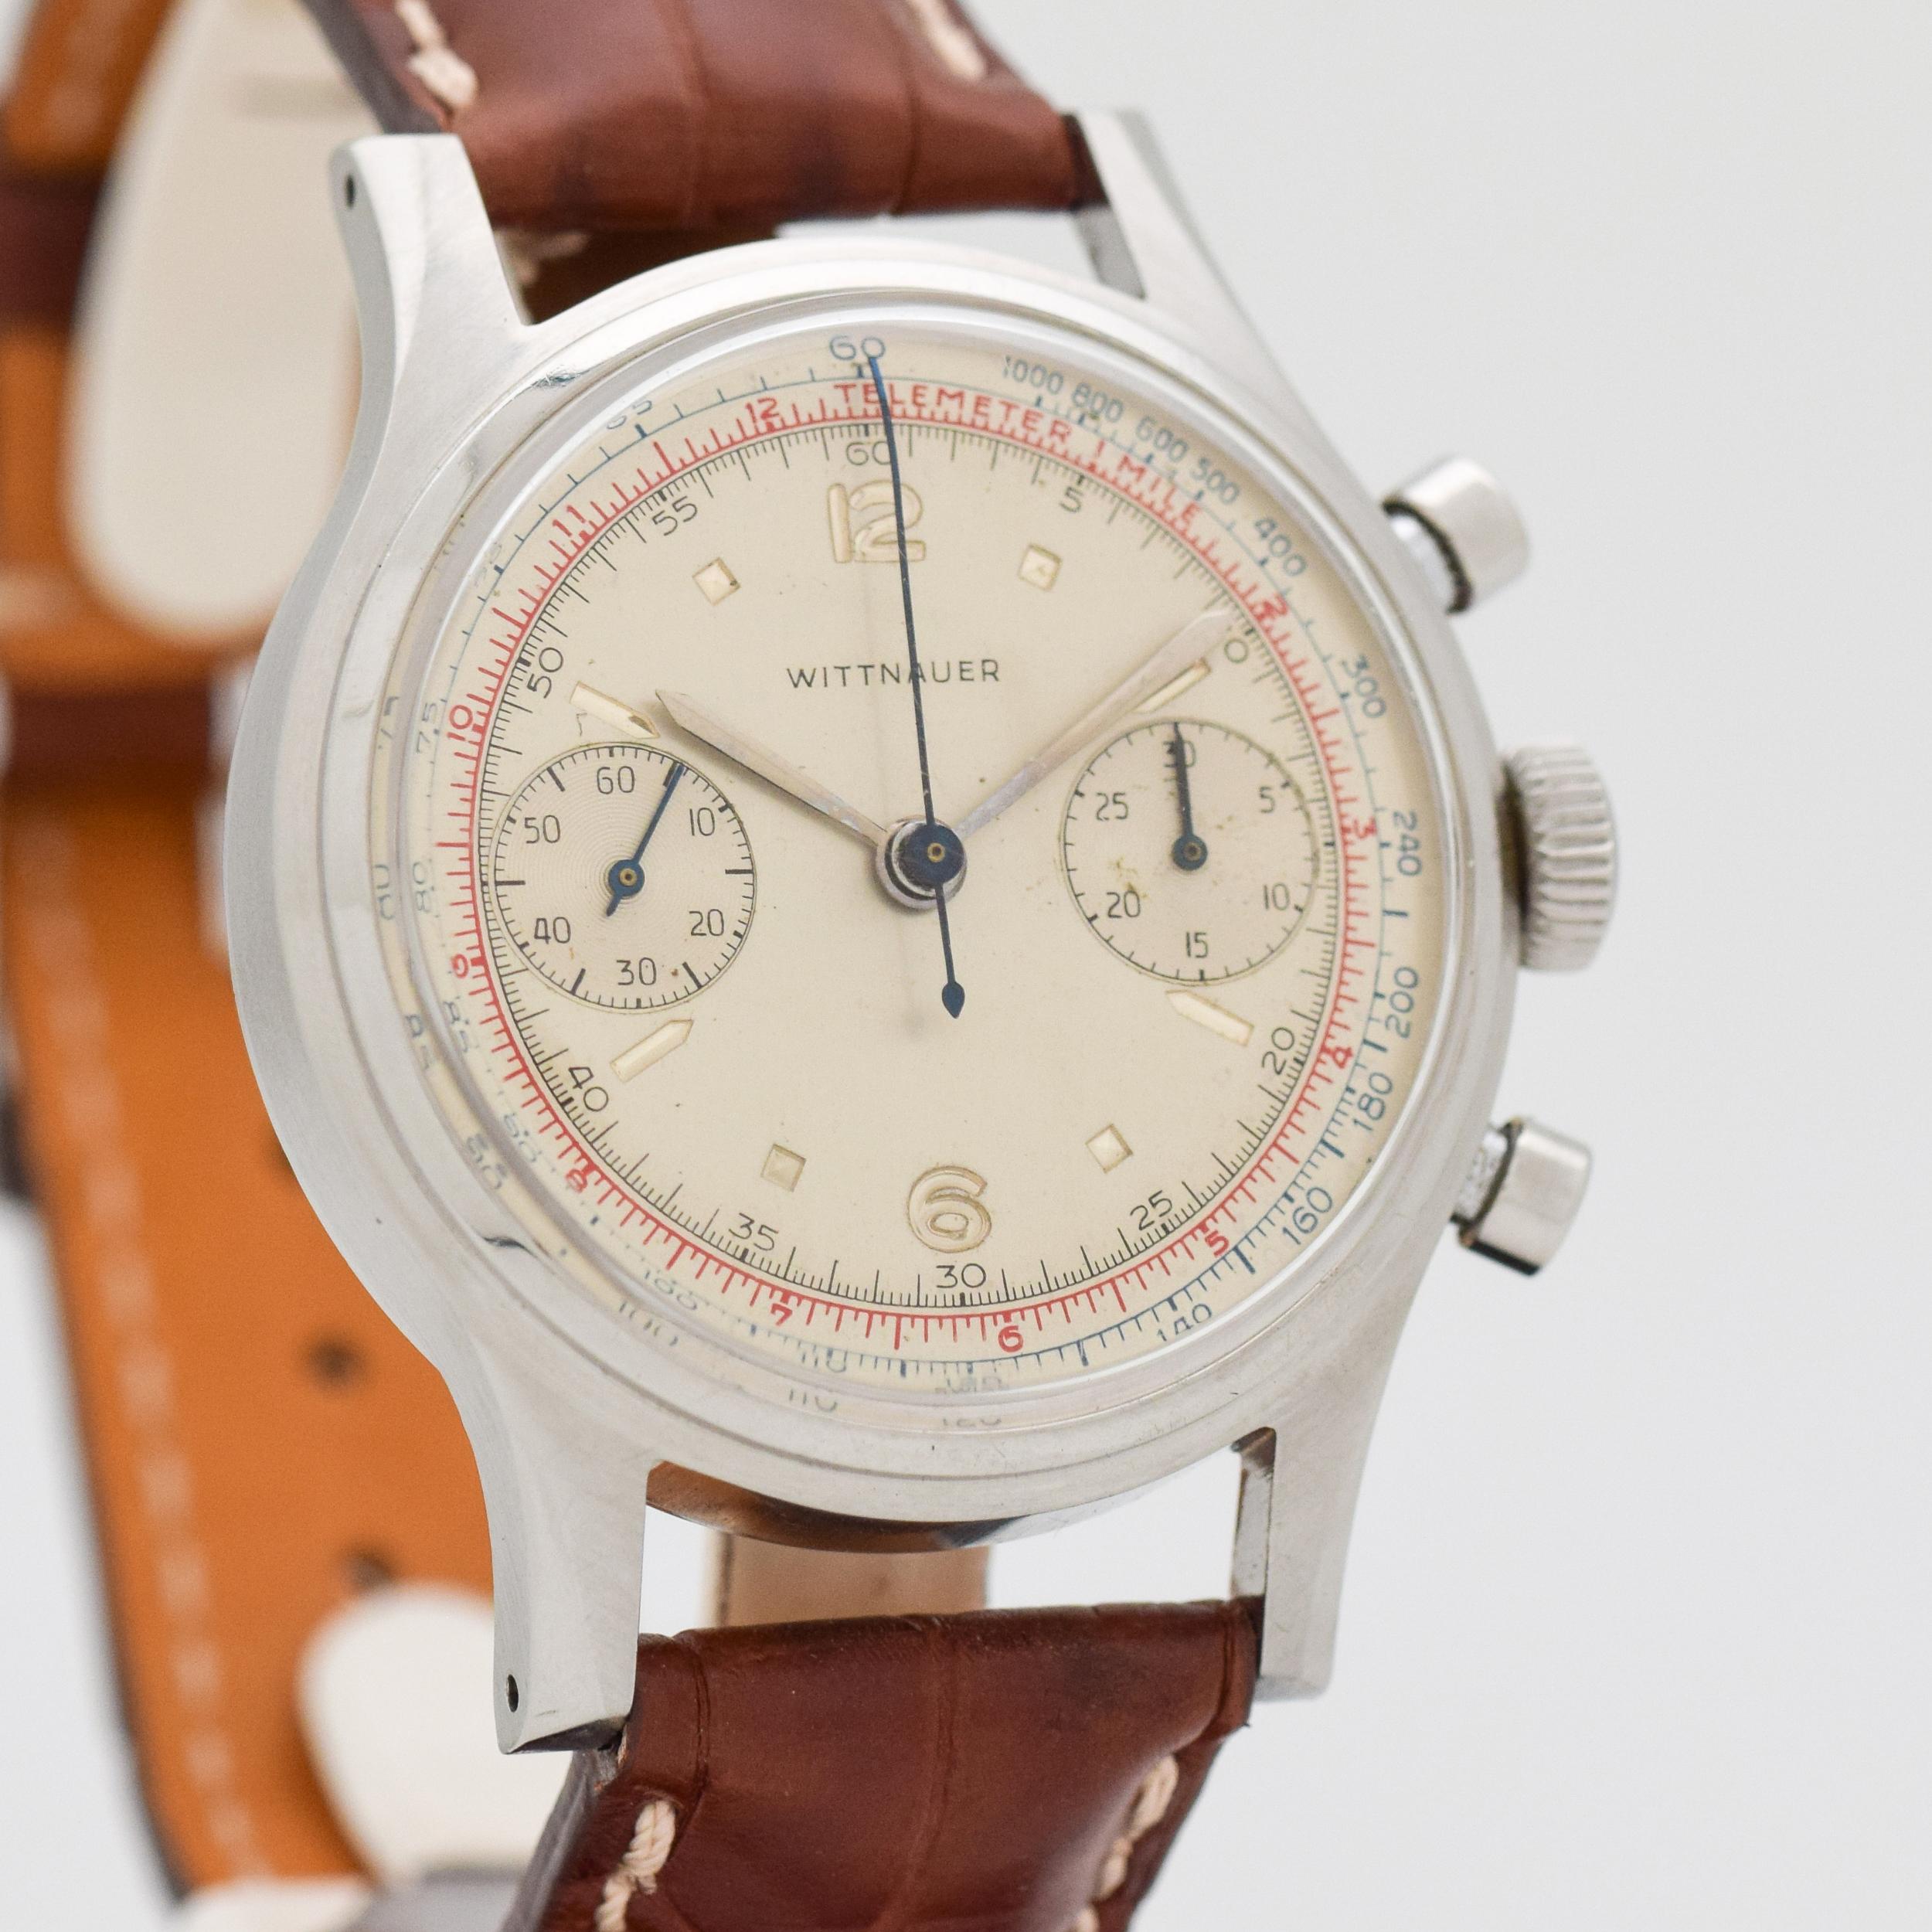 a 1960's Vintage WIttnauer Chronograph 2-Register Watch. Stainless Steel watch case that measures in at 36mm wide. Original, silver dial. Powered by a manual-wind, Venus 188 movement. Featured on a Matte Brown-colored, Longines Alligator watch